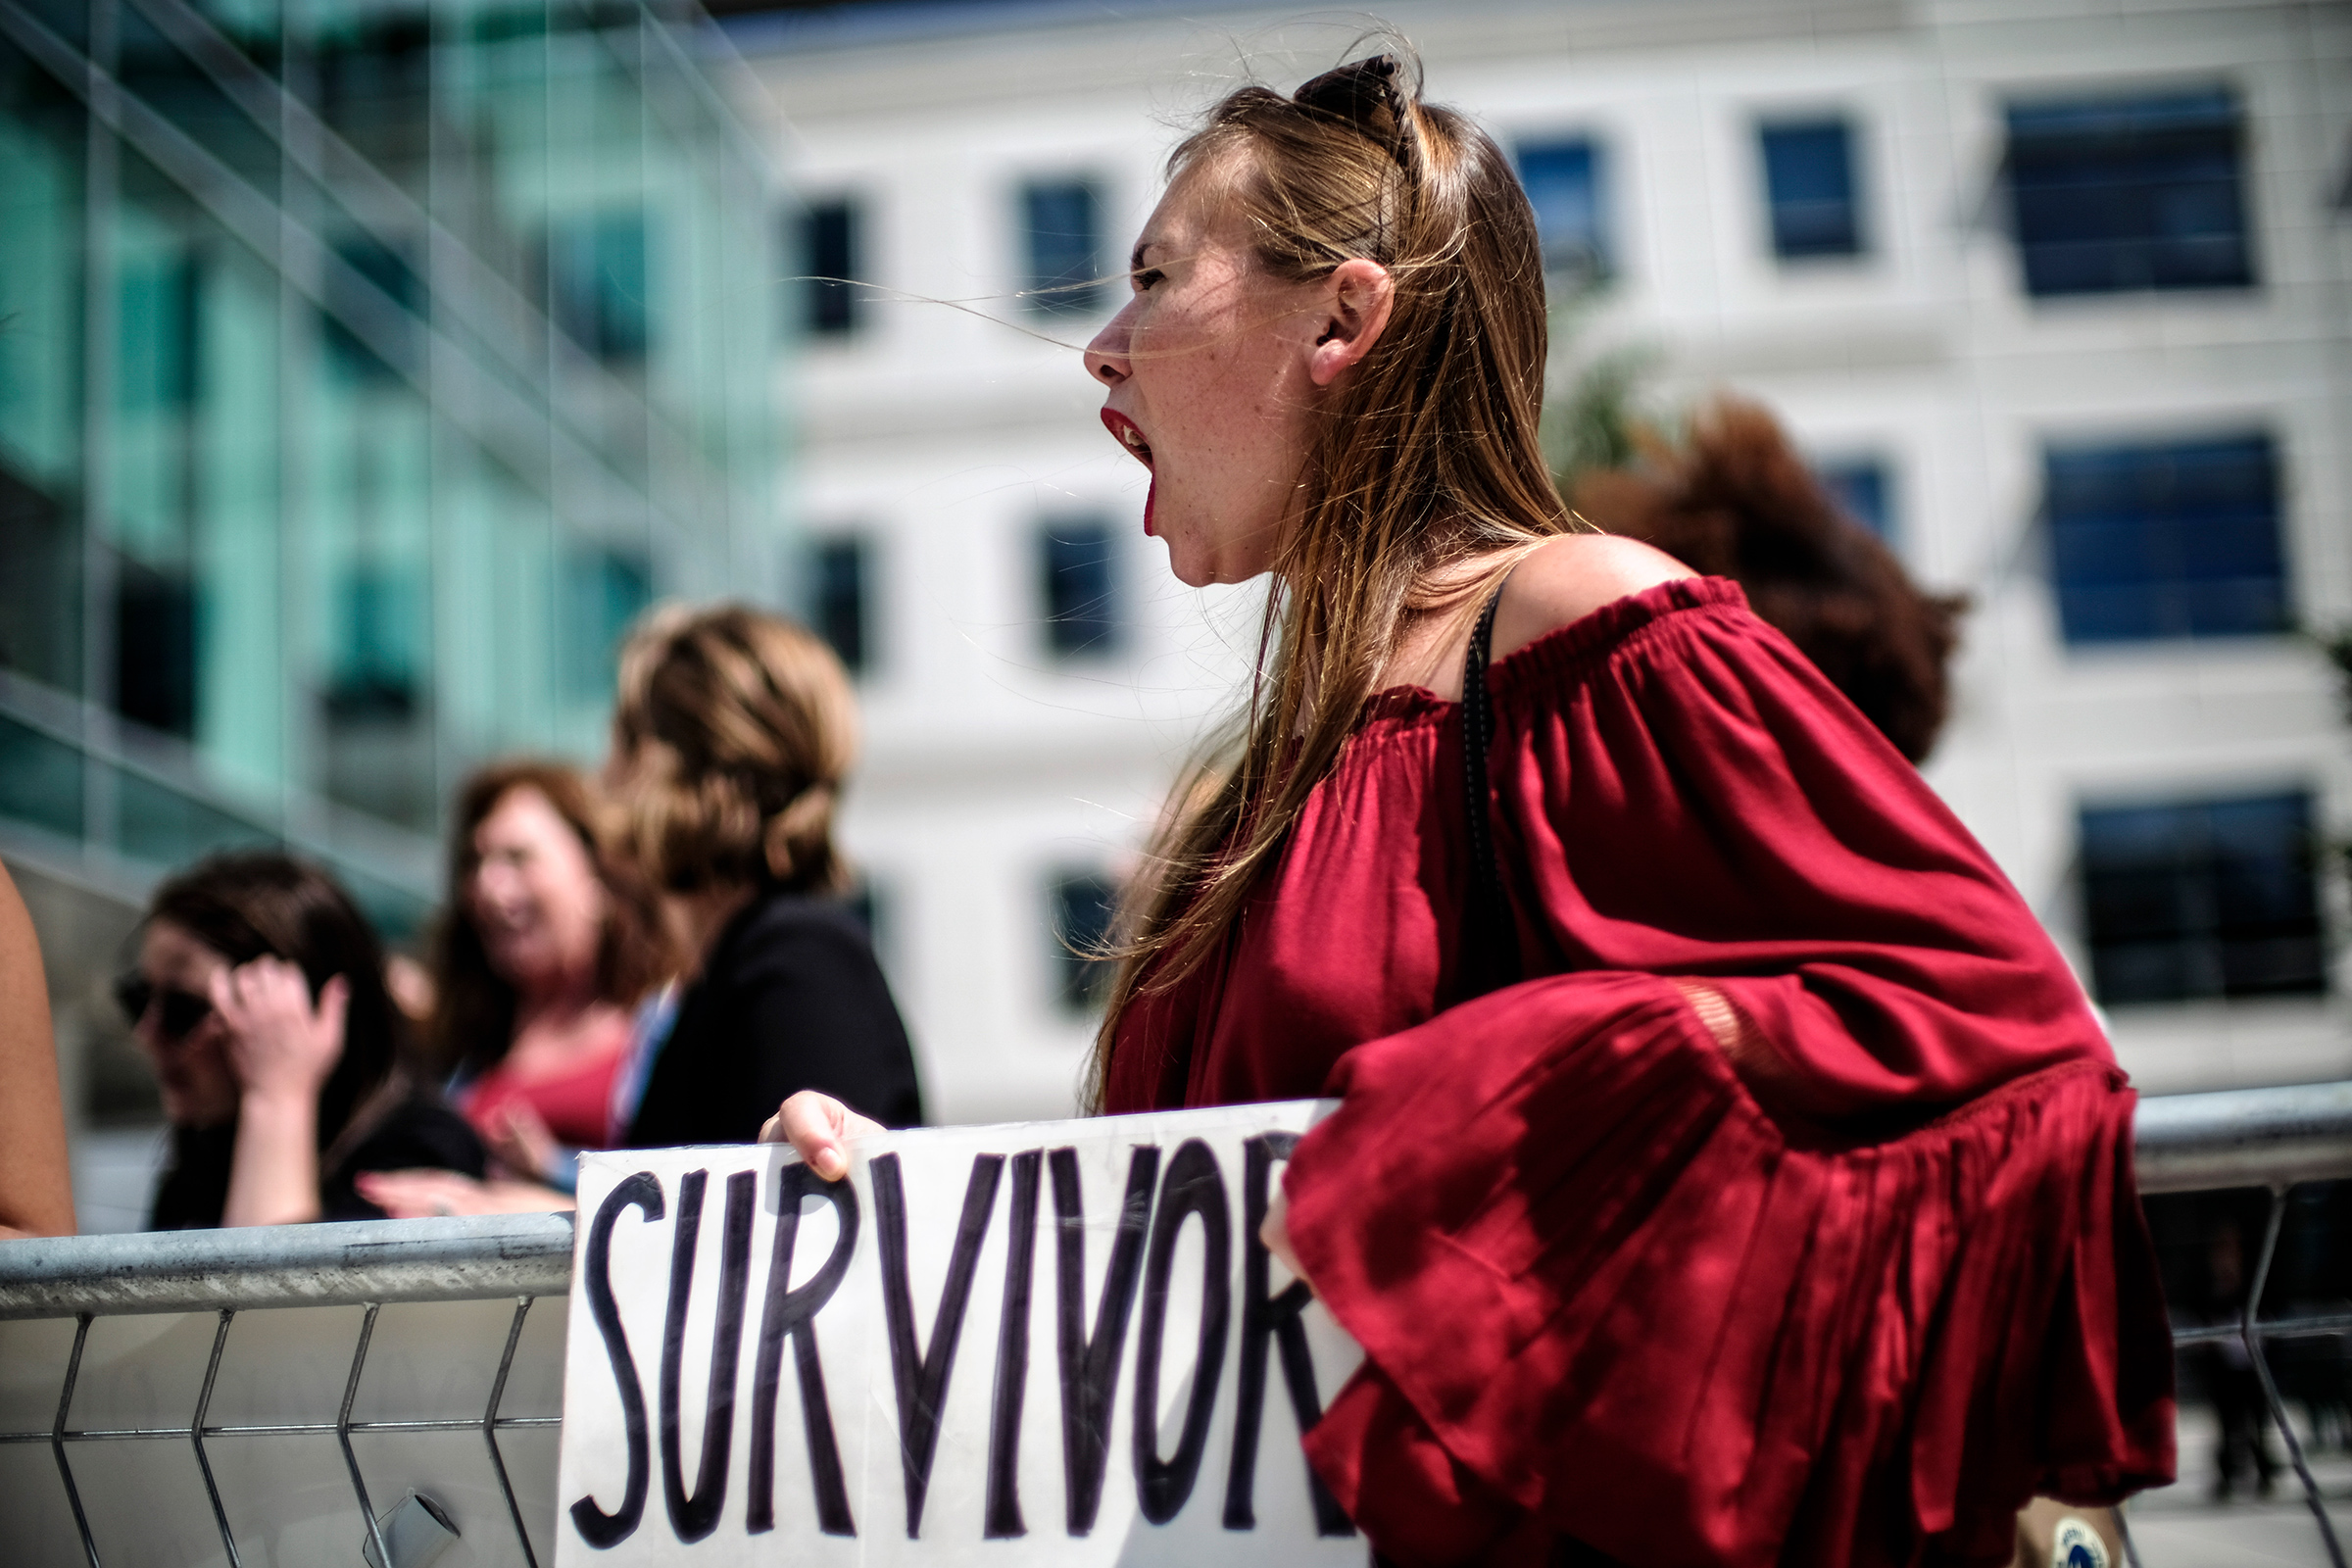 Meghan Downey protests outside as U.S. Education Secretary Betsy DeVos announces changes in federal policy on rules for investigating sexual assault reports on college campuses in Arlington, Virginia  on Sep. 7, 2017. (J. Lawler Duggan—The Washington Post via Getty Images)